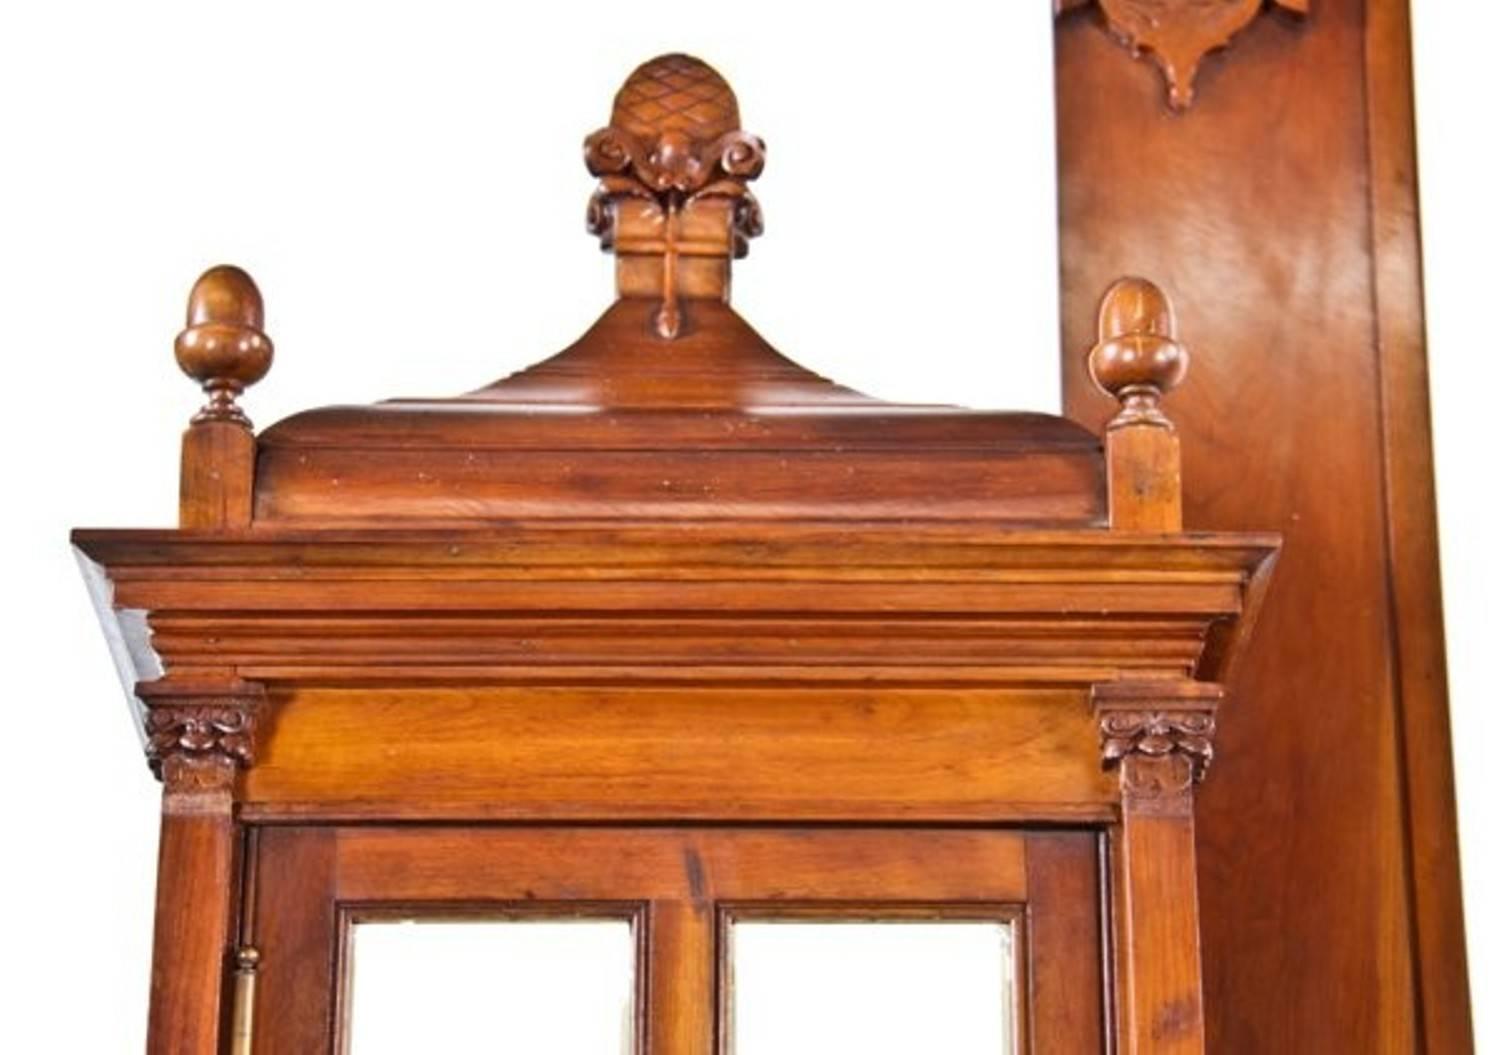 truly exceptional 19th century towering solid cherry wood interior residential fireplace mantel salvaged from the david c. cook mansion, constructed in 1884-85. the sectional mantelpiece contains a rather unique combination of highly stylized design